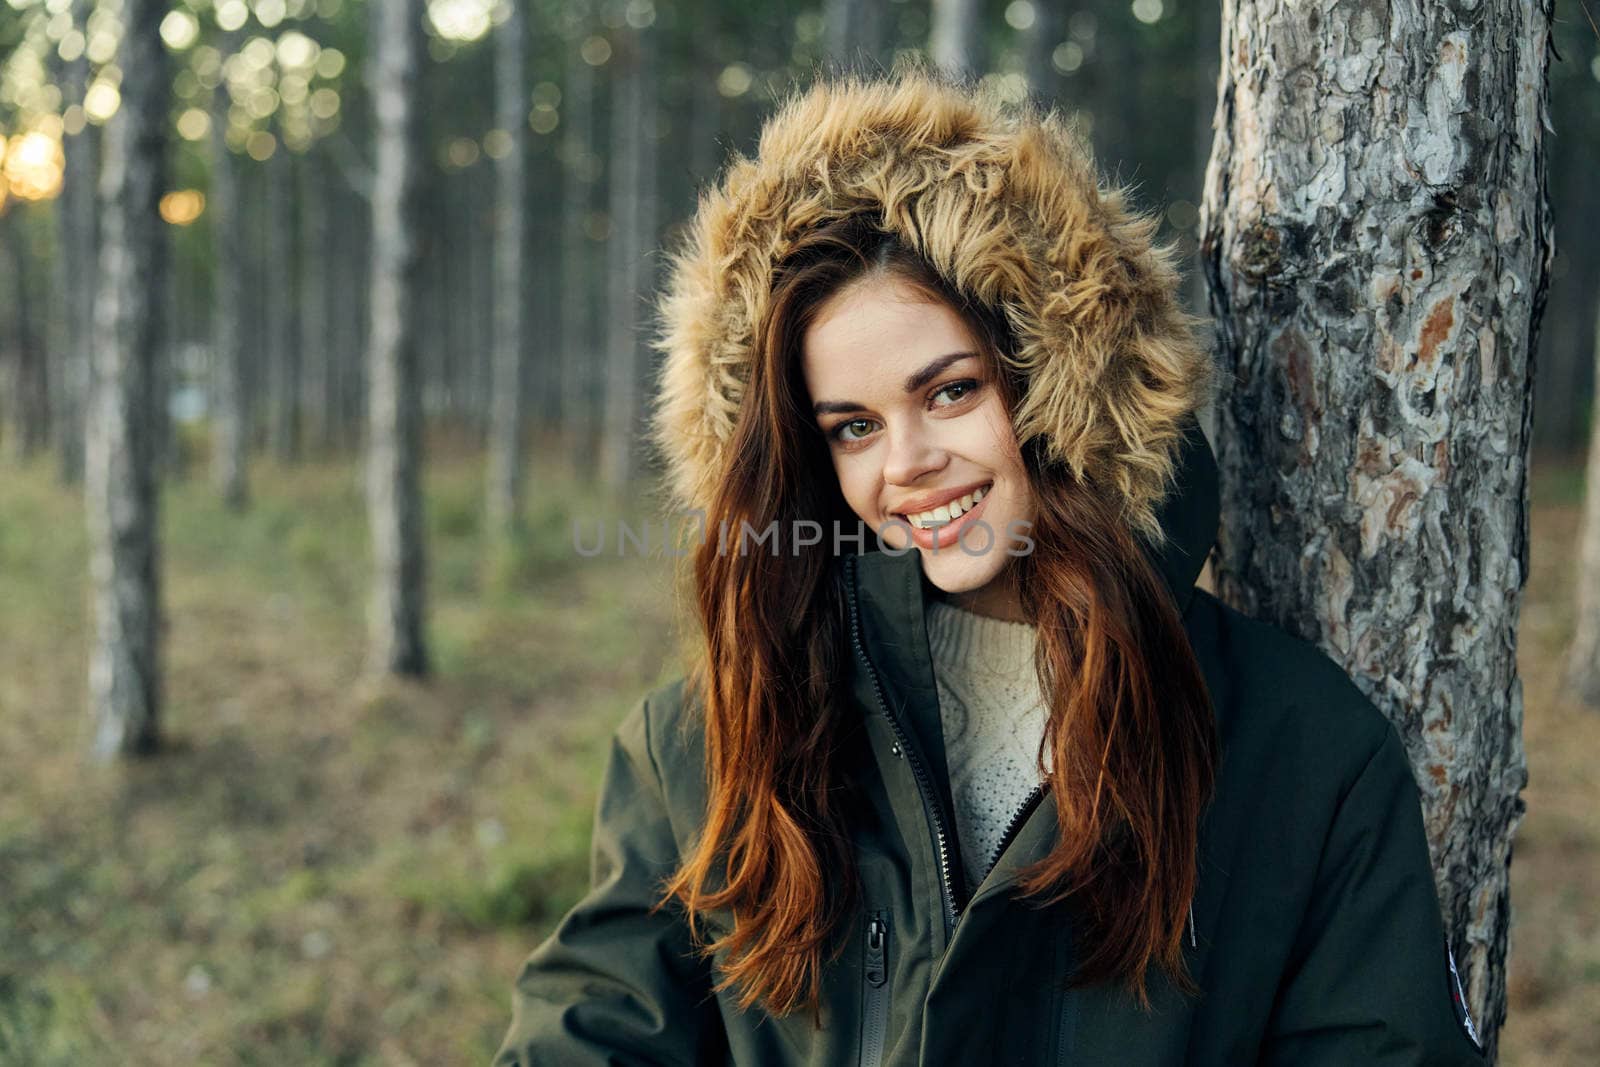 Smiling woman on nature tourism as a lifestyle near a tree by SHOTPRIME